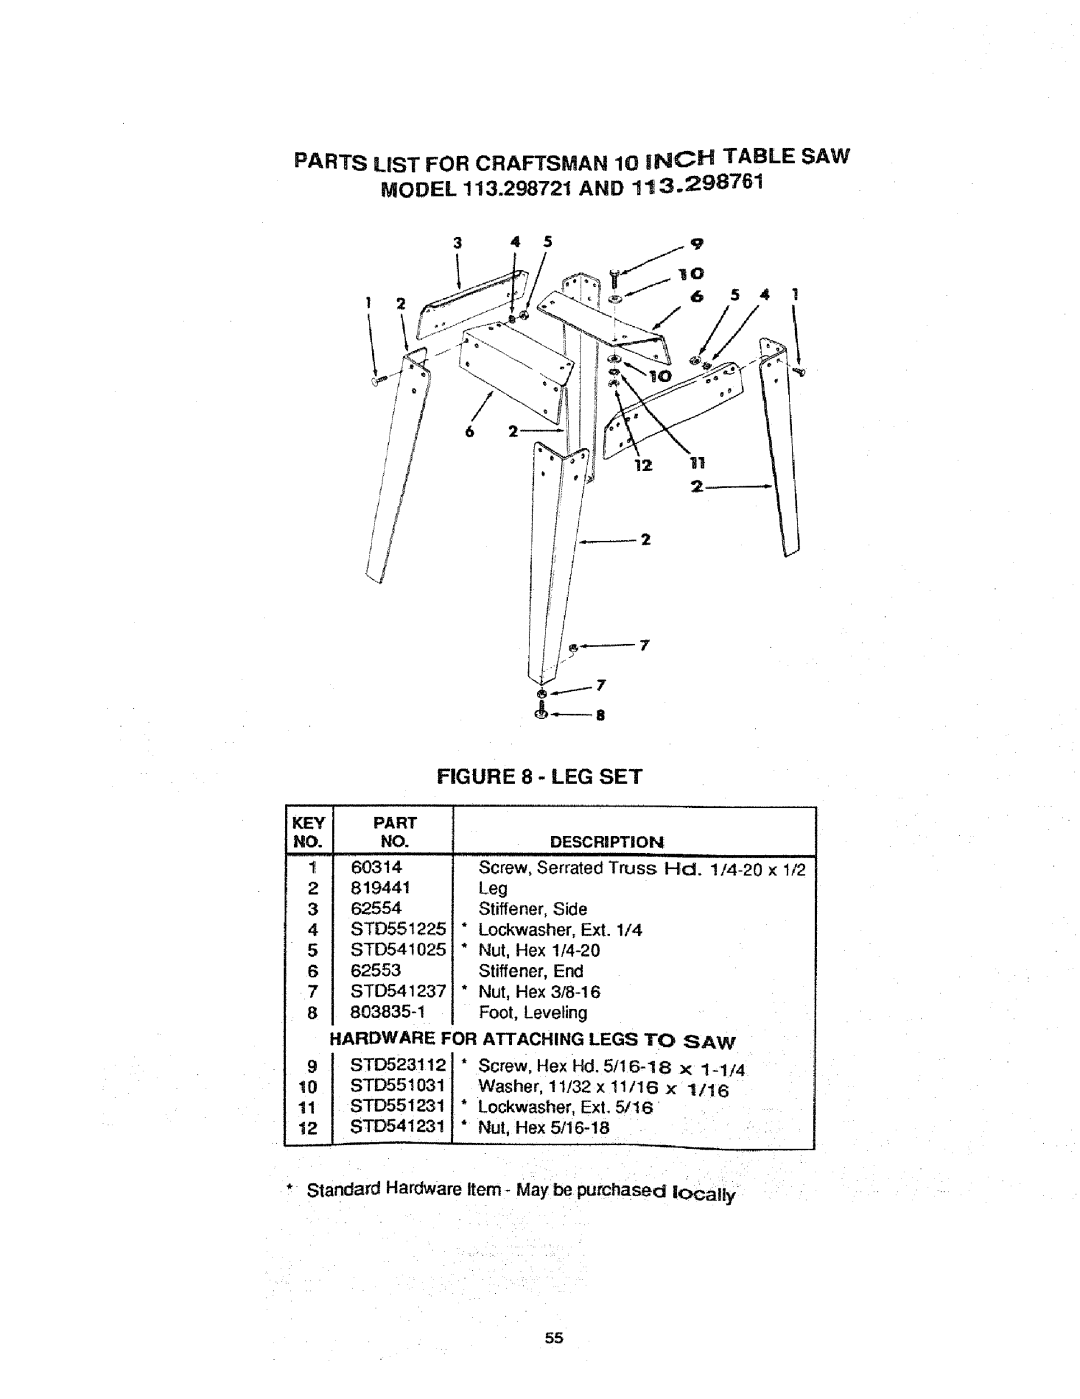 Craftsman 113.298721, 113.298761 manual PARTS LiST FOR CRAFTSMAN 10 iNCH TABLE SAW MODEL 113.298721 AND, Leg Set 